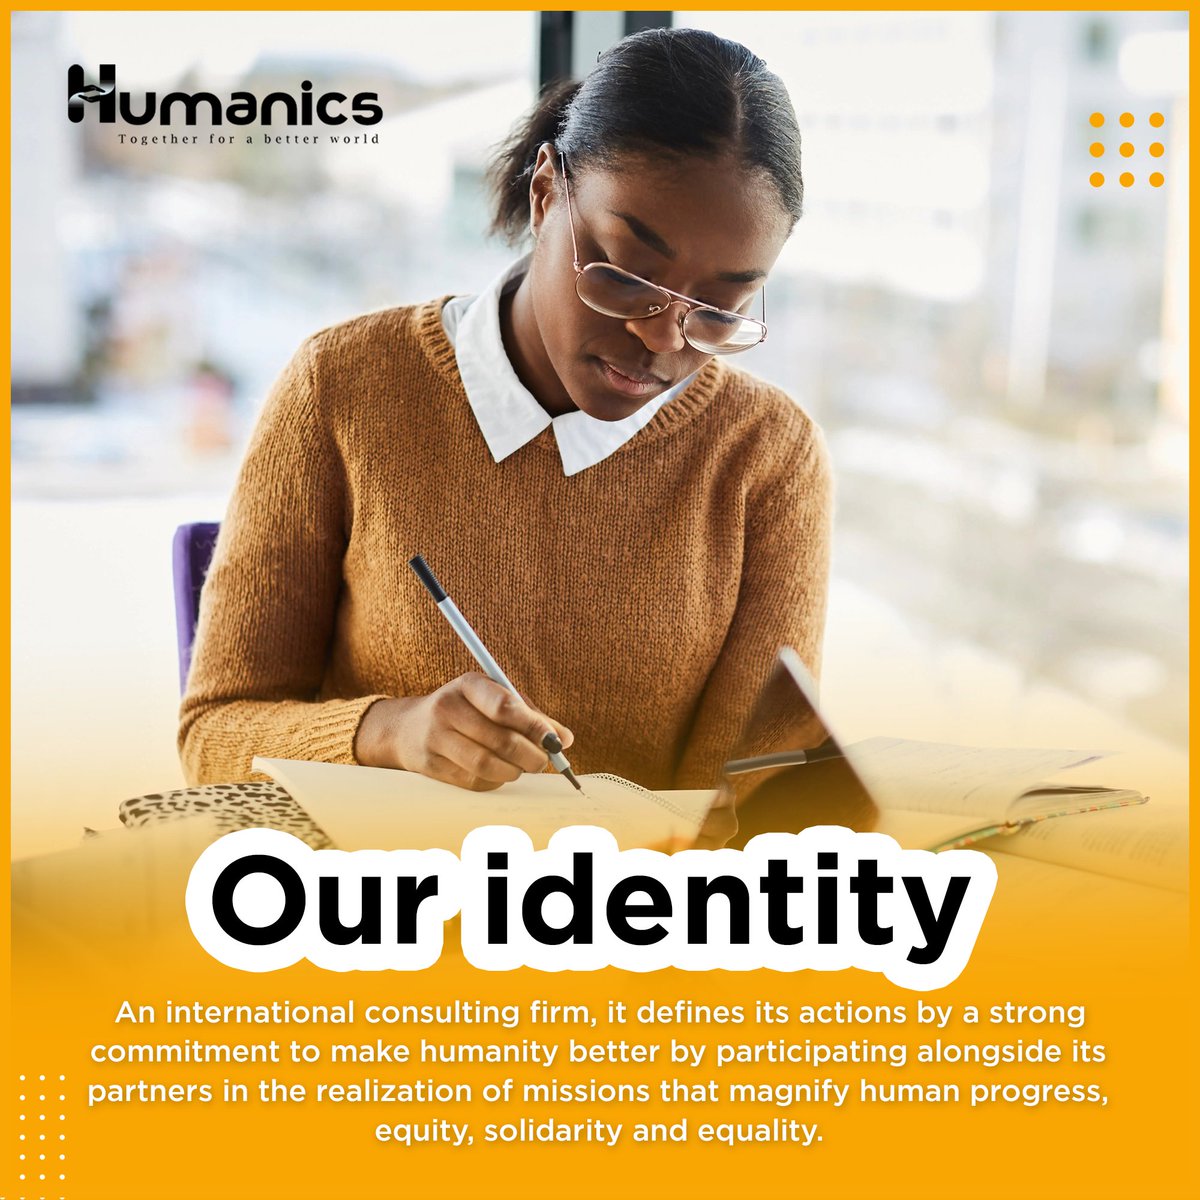 As an international consulting firm, @humanicsgroup defines its actions by a strong commitment to making #humanity better by participating alongside its partners in missions that magnify #human_progress, #equity, #solidarity and #equality.

#TogetherForABetterWorld
#humqnics